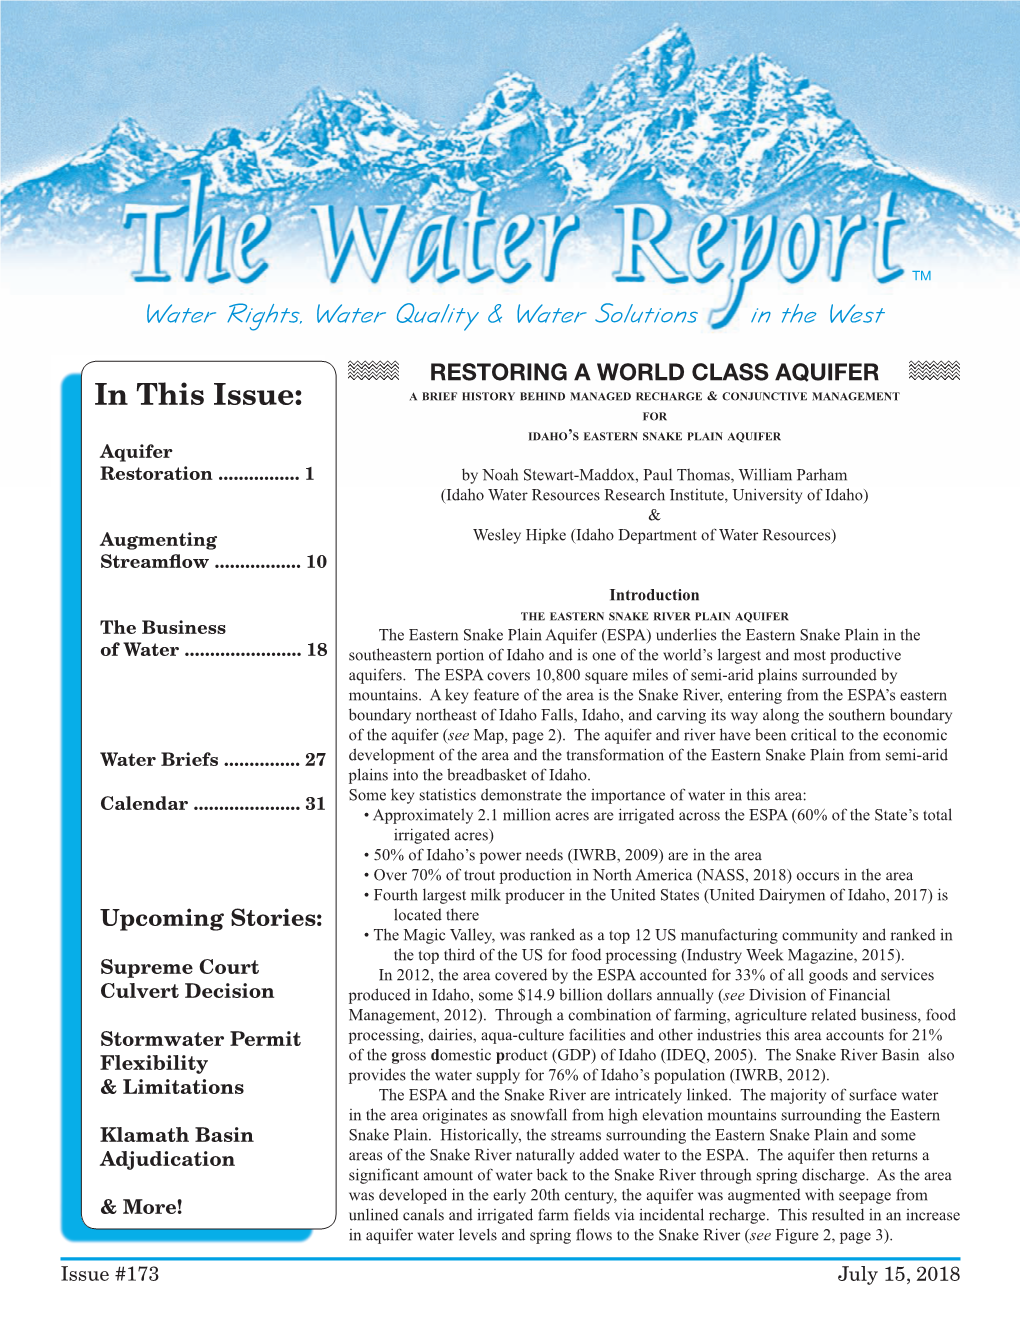 In This Issue: a Brief History Behind Managed Recharge & Conjunctive Management for Idaho’S Eastern Snake Plain Aquifer Aquifer Restoration